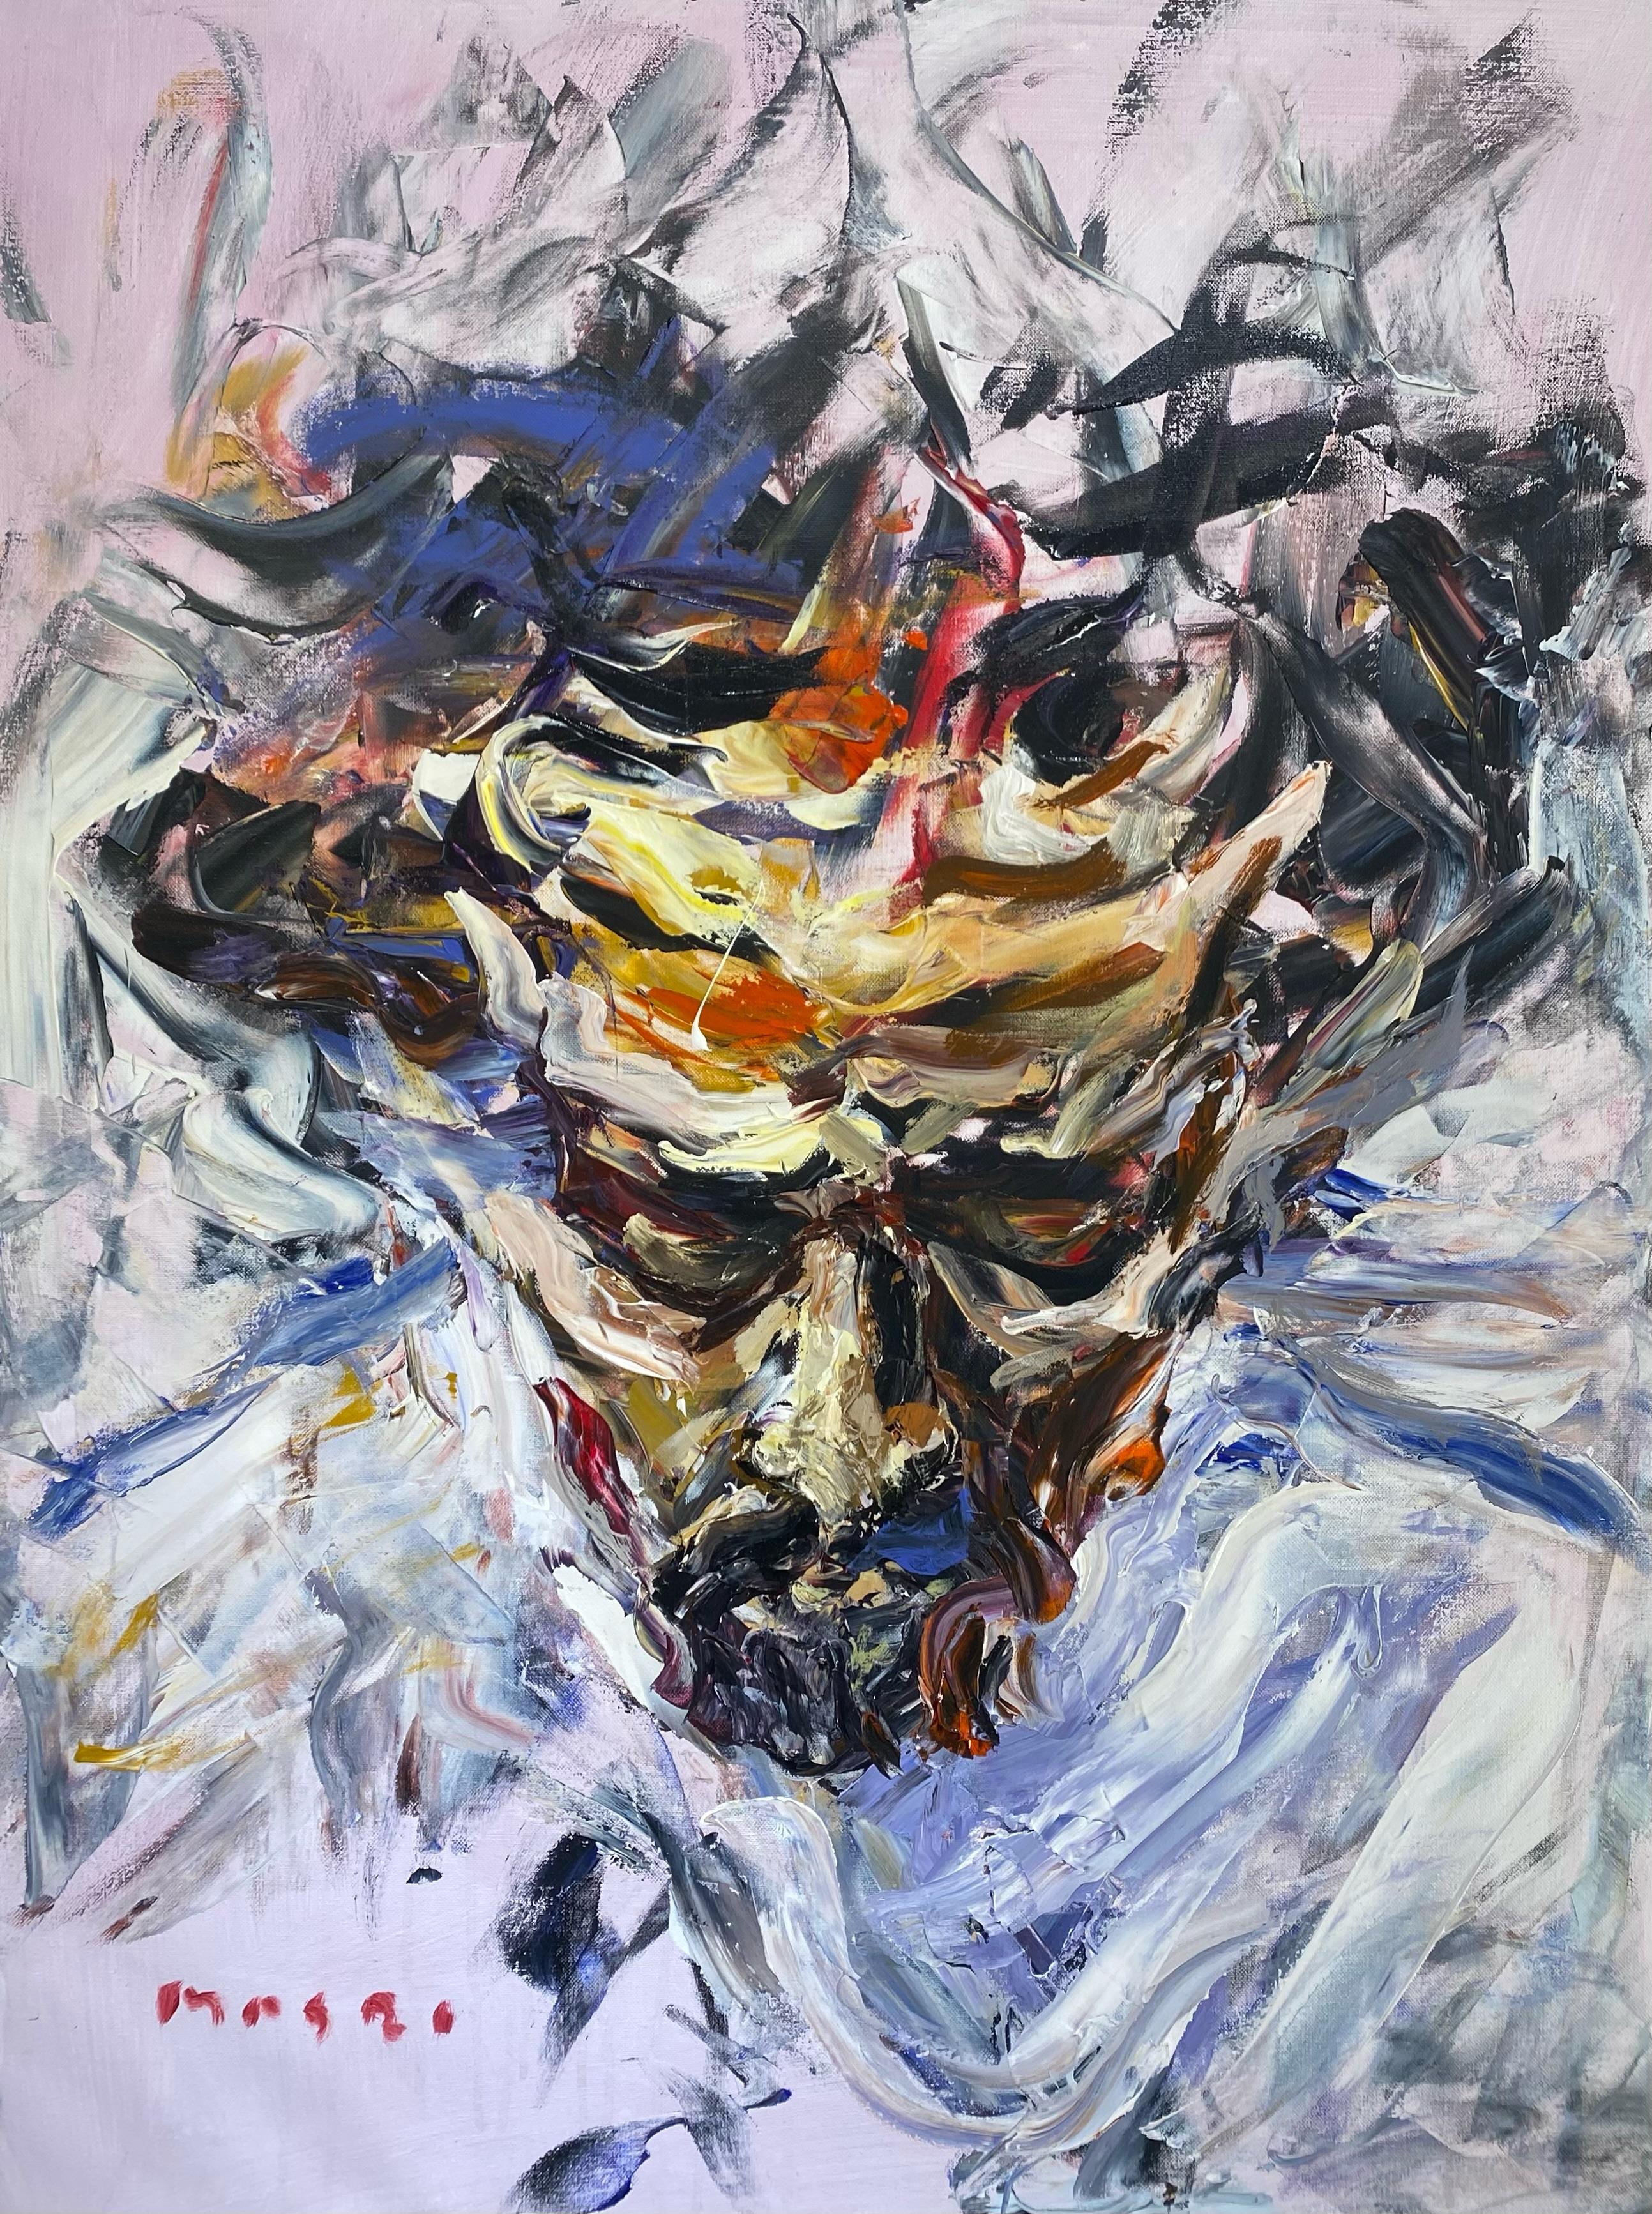 Masri Hayssam Figurative Painting - ‘Enlightened’ Abstract Portrait - Mixed Media 40"x30" by Masri